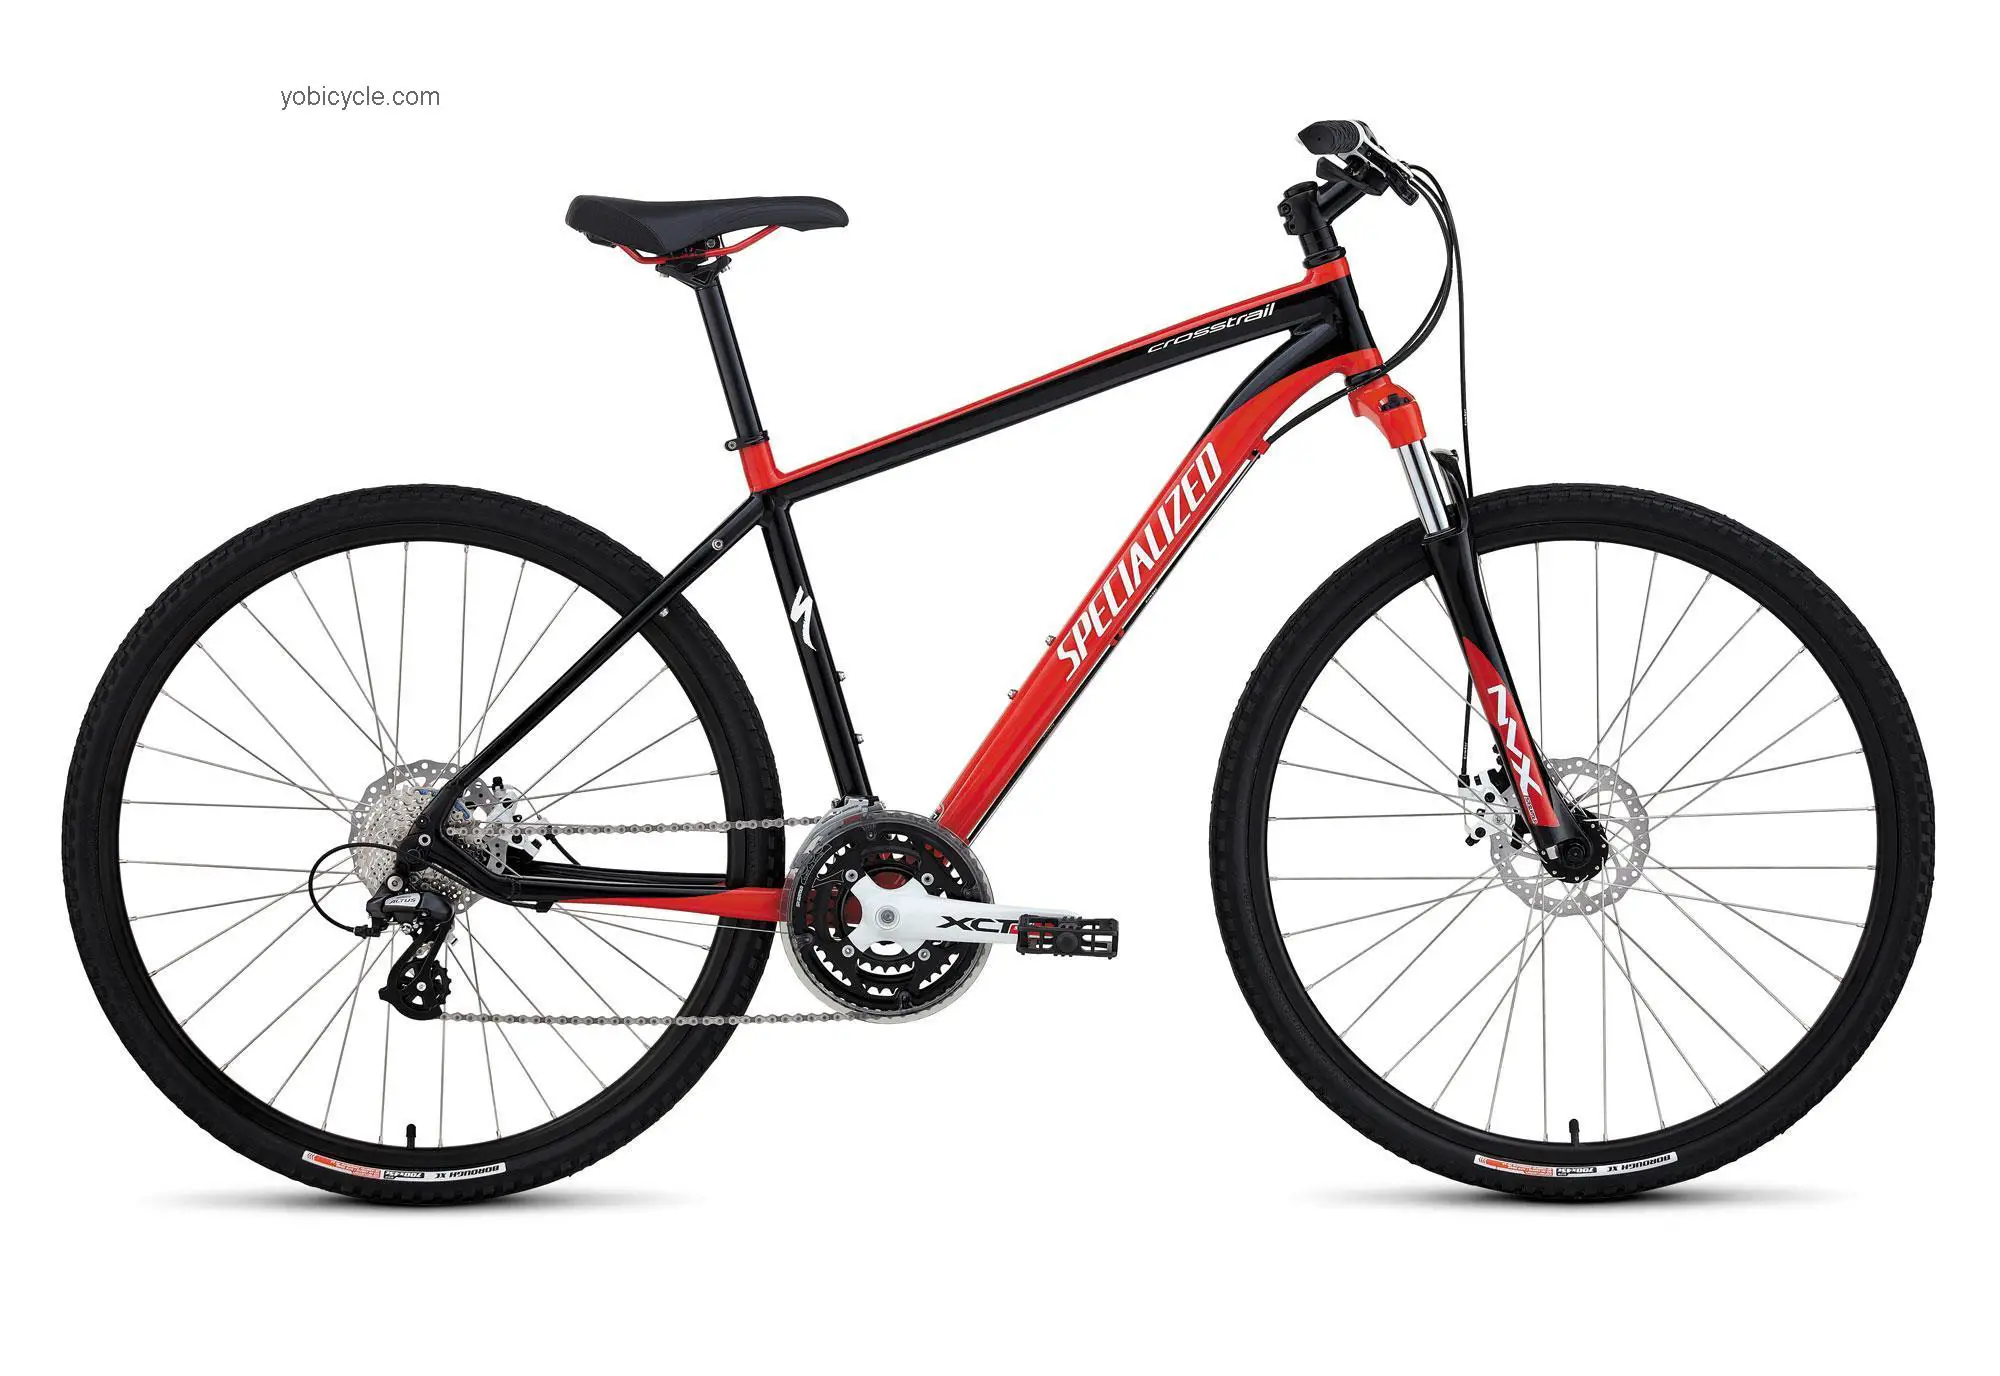 Specialized Crosstrail Disc 2012 comparison online with competitors